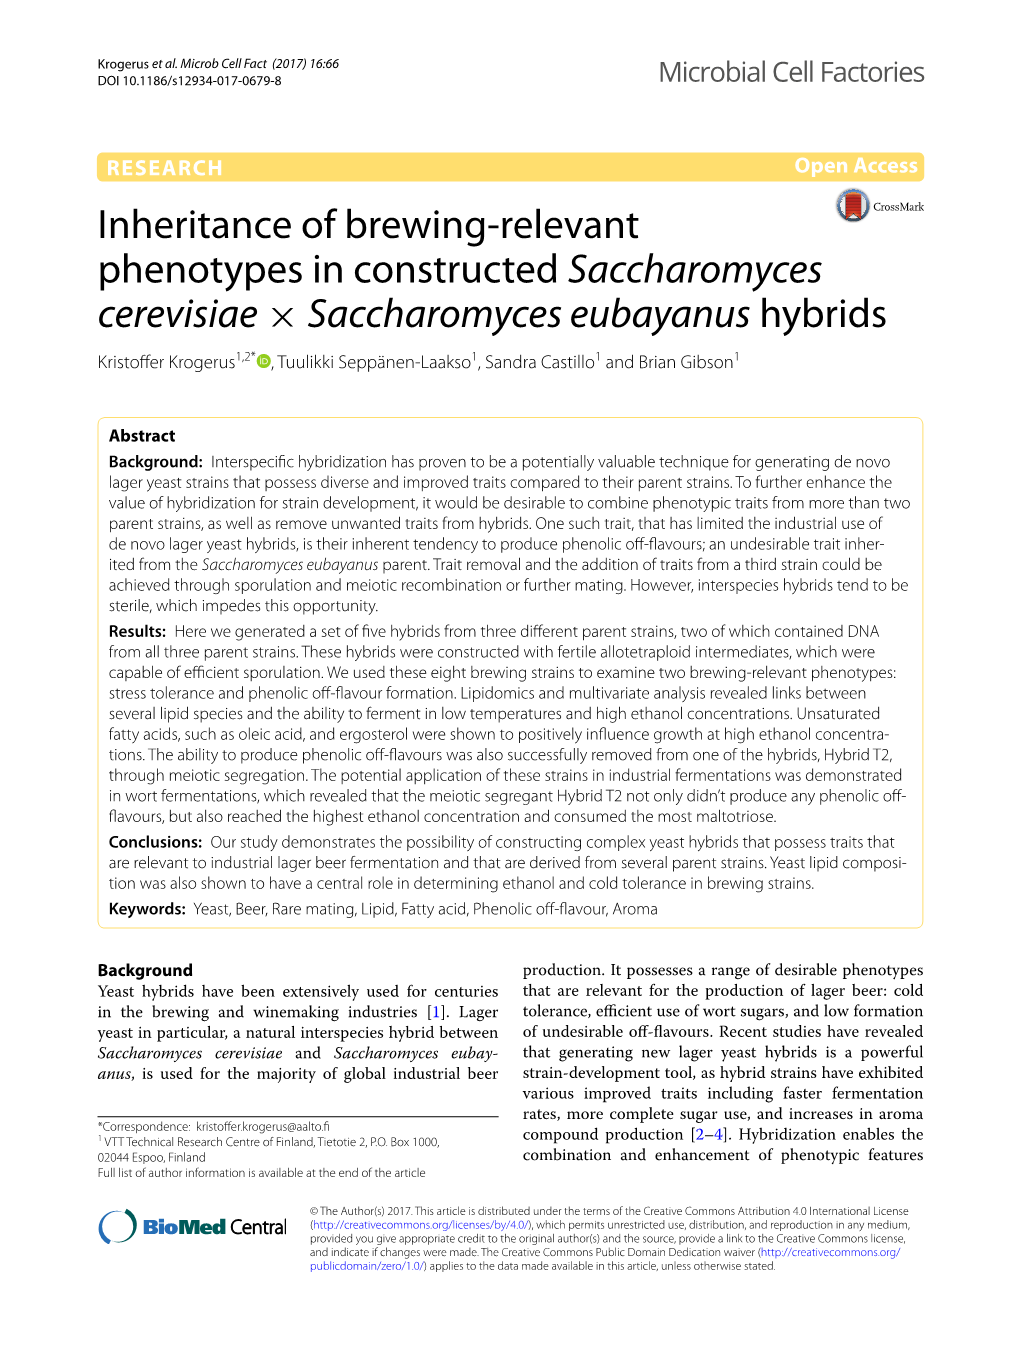 Inheritance of Brewing-Relevant Phenotypes in Constructed Saccharomyces Cerevisiae × Saccharomyces Eubayanus Hybrids